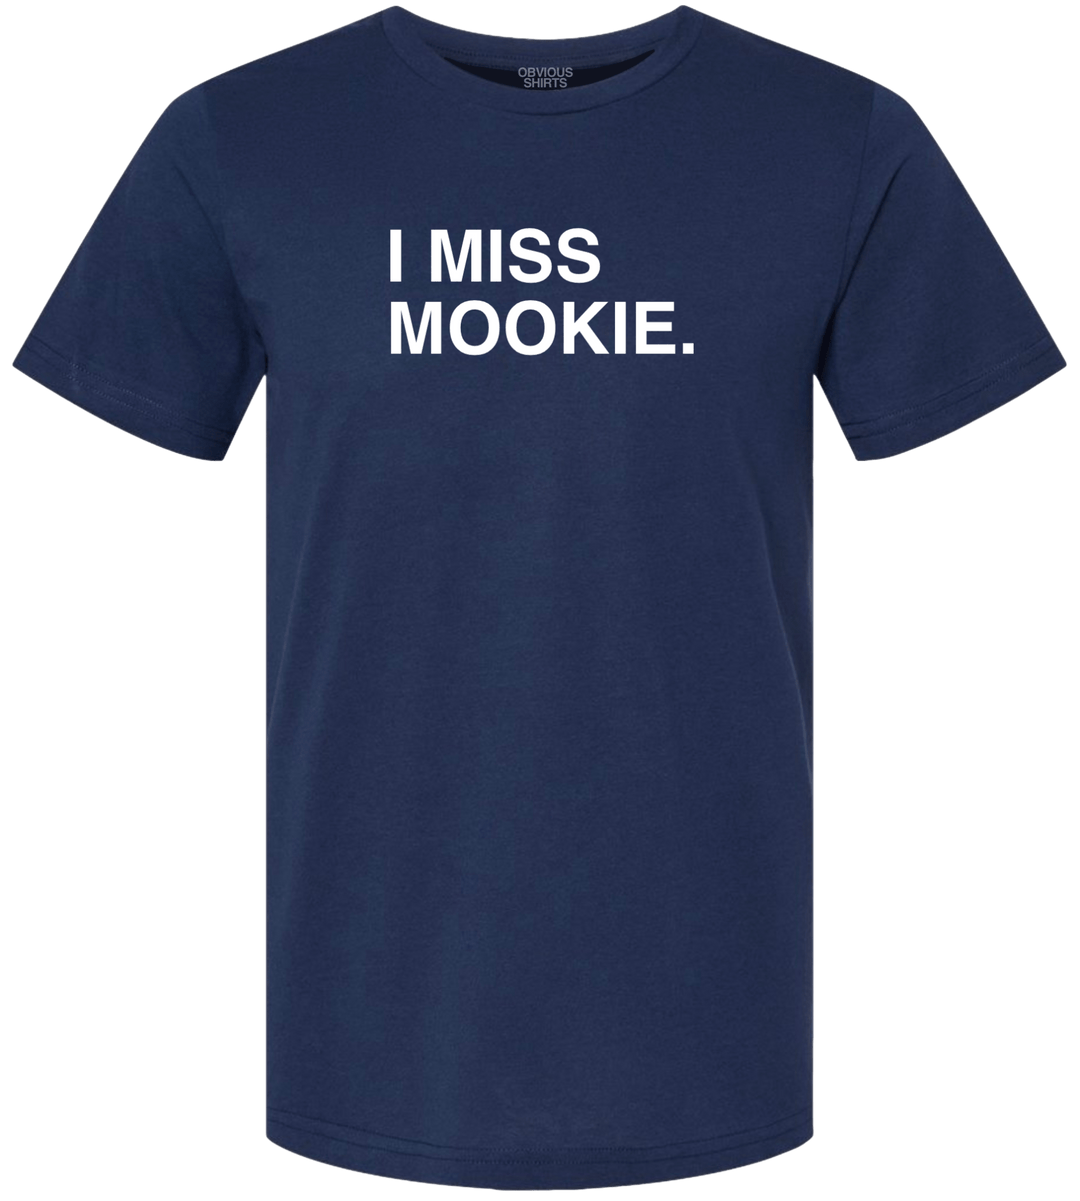 I MISS MOOKIE. - OBVIOUS SHIRTS